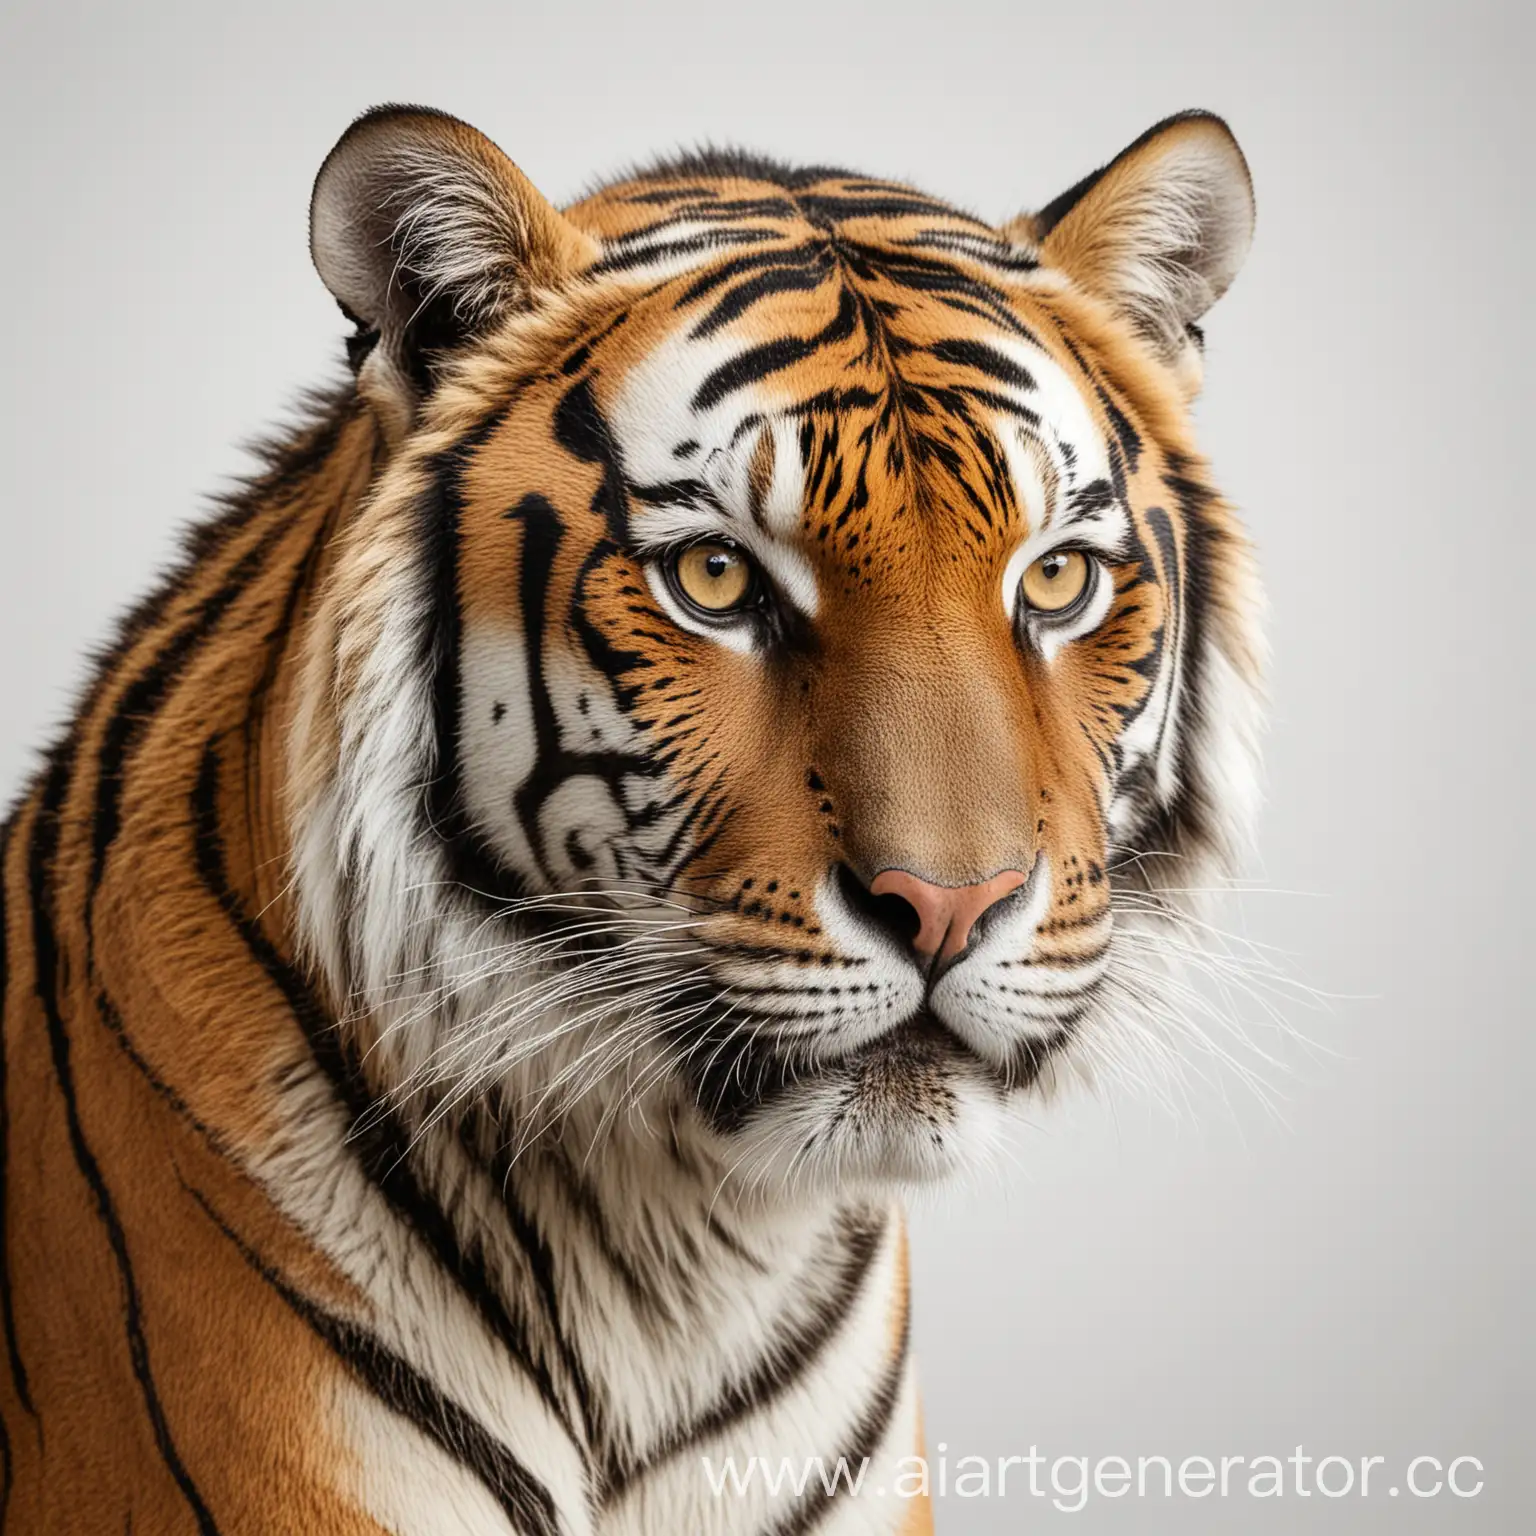 Majestic-Tiger-Roaming-Against-a-Clean-White-Background